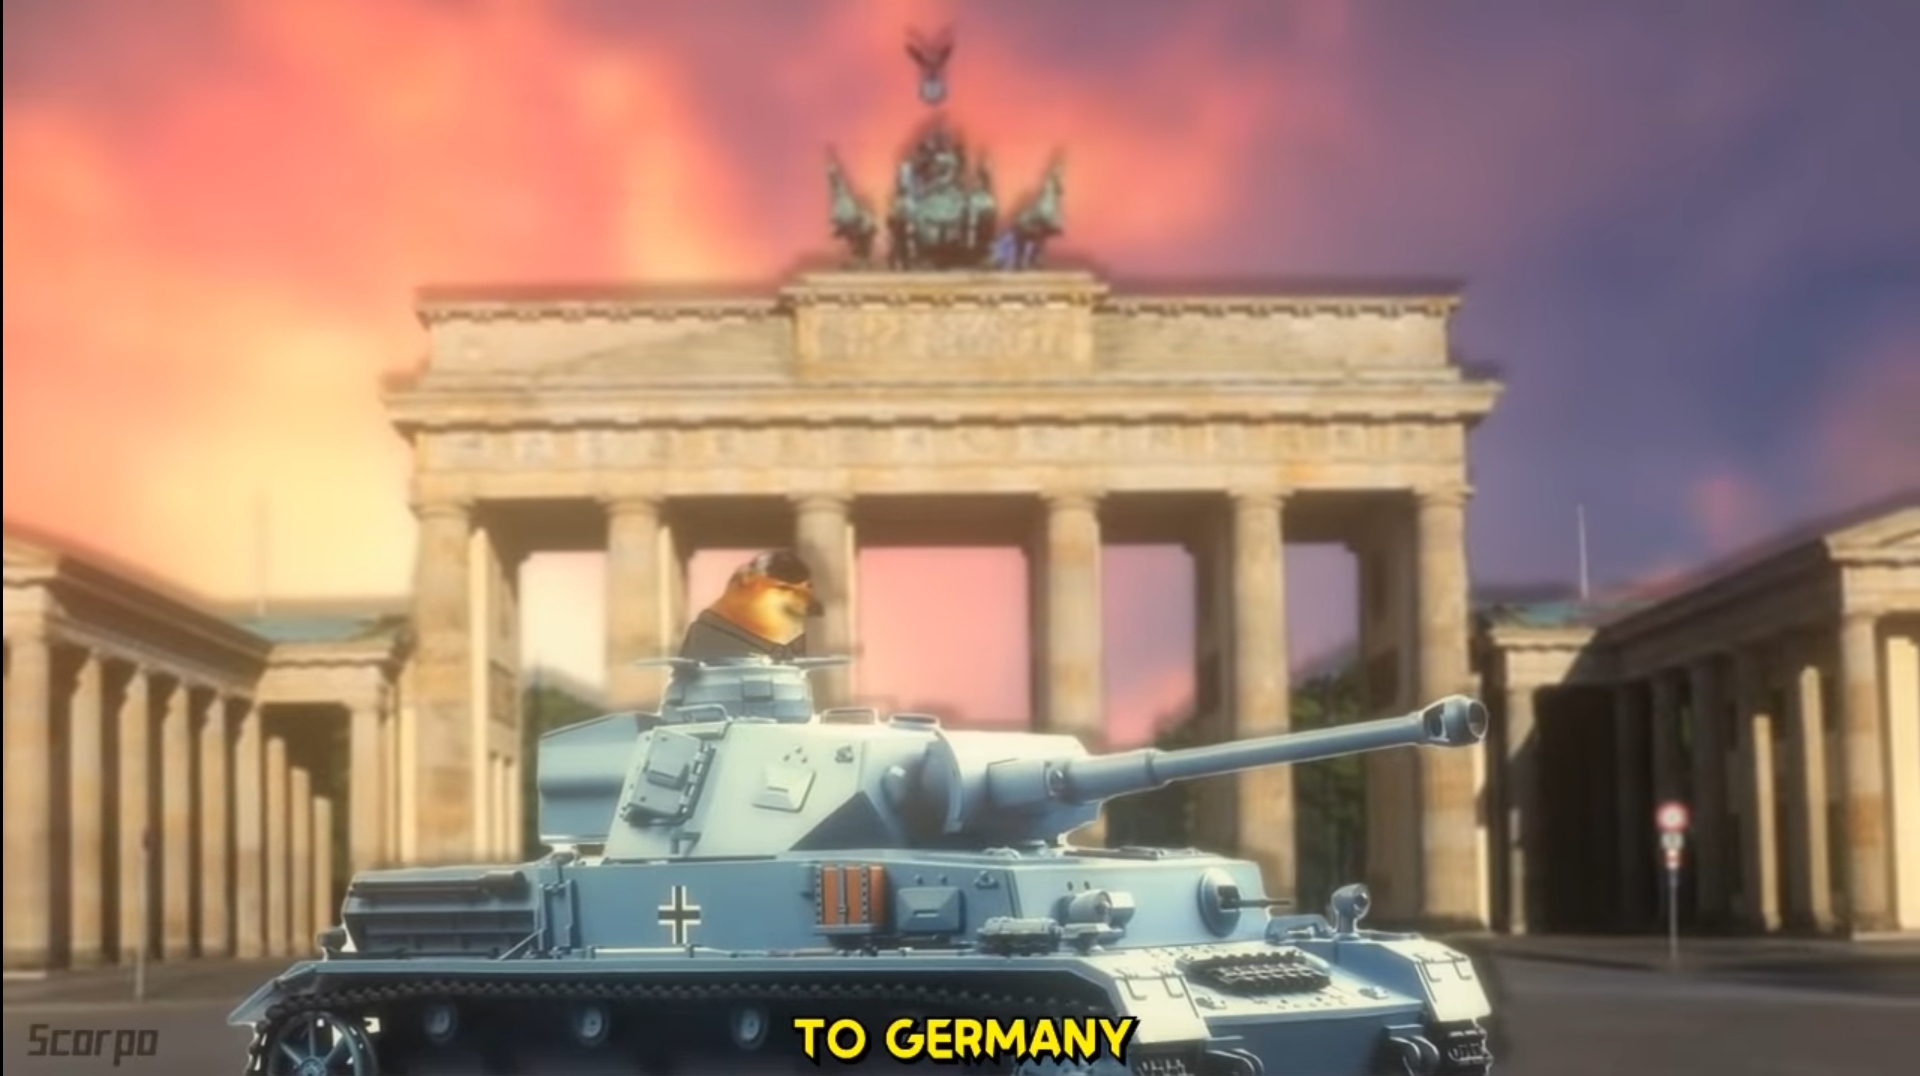 To germany Blank Meme Template